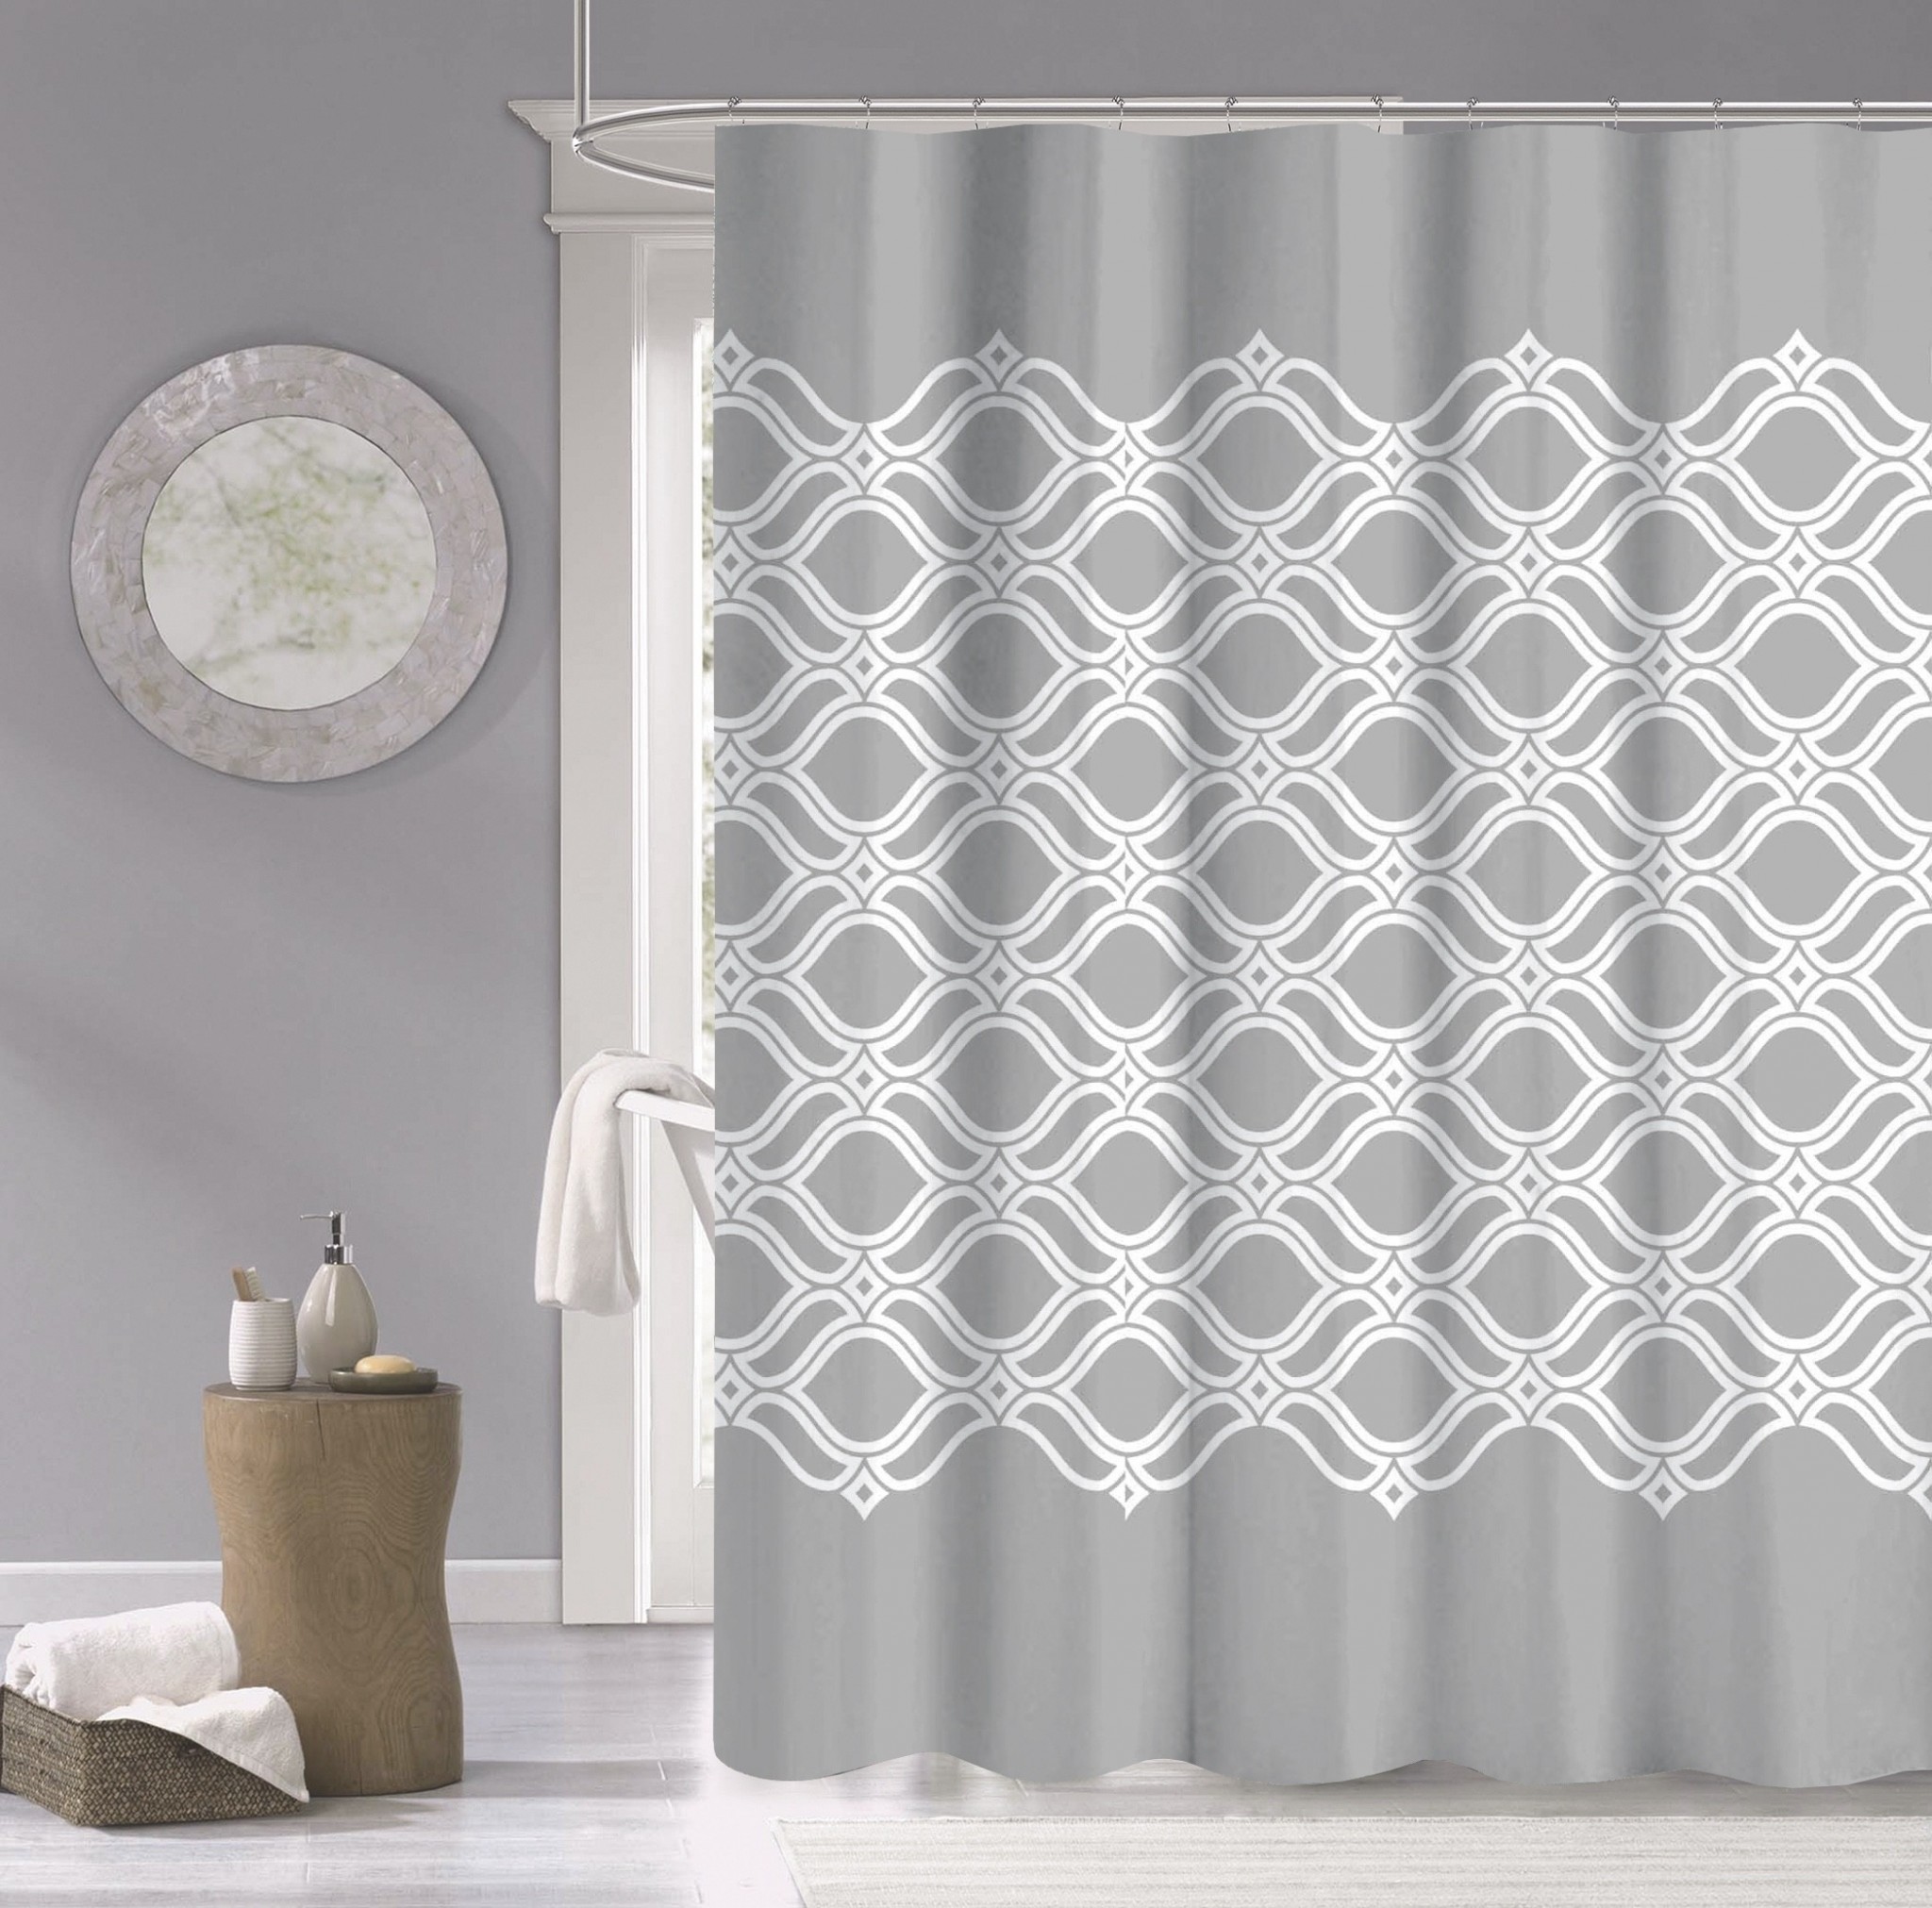 HomeRoots Gray and White Printed Lattice Shower Curtain